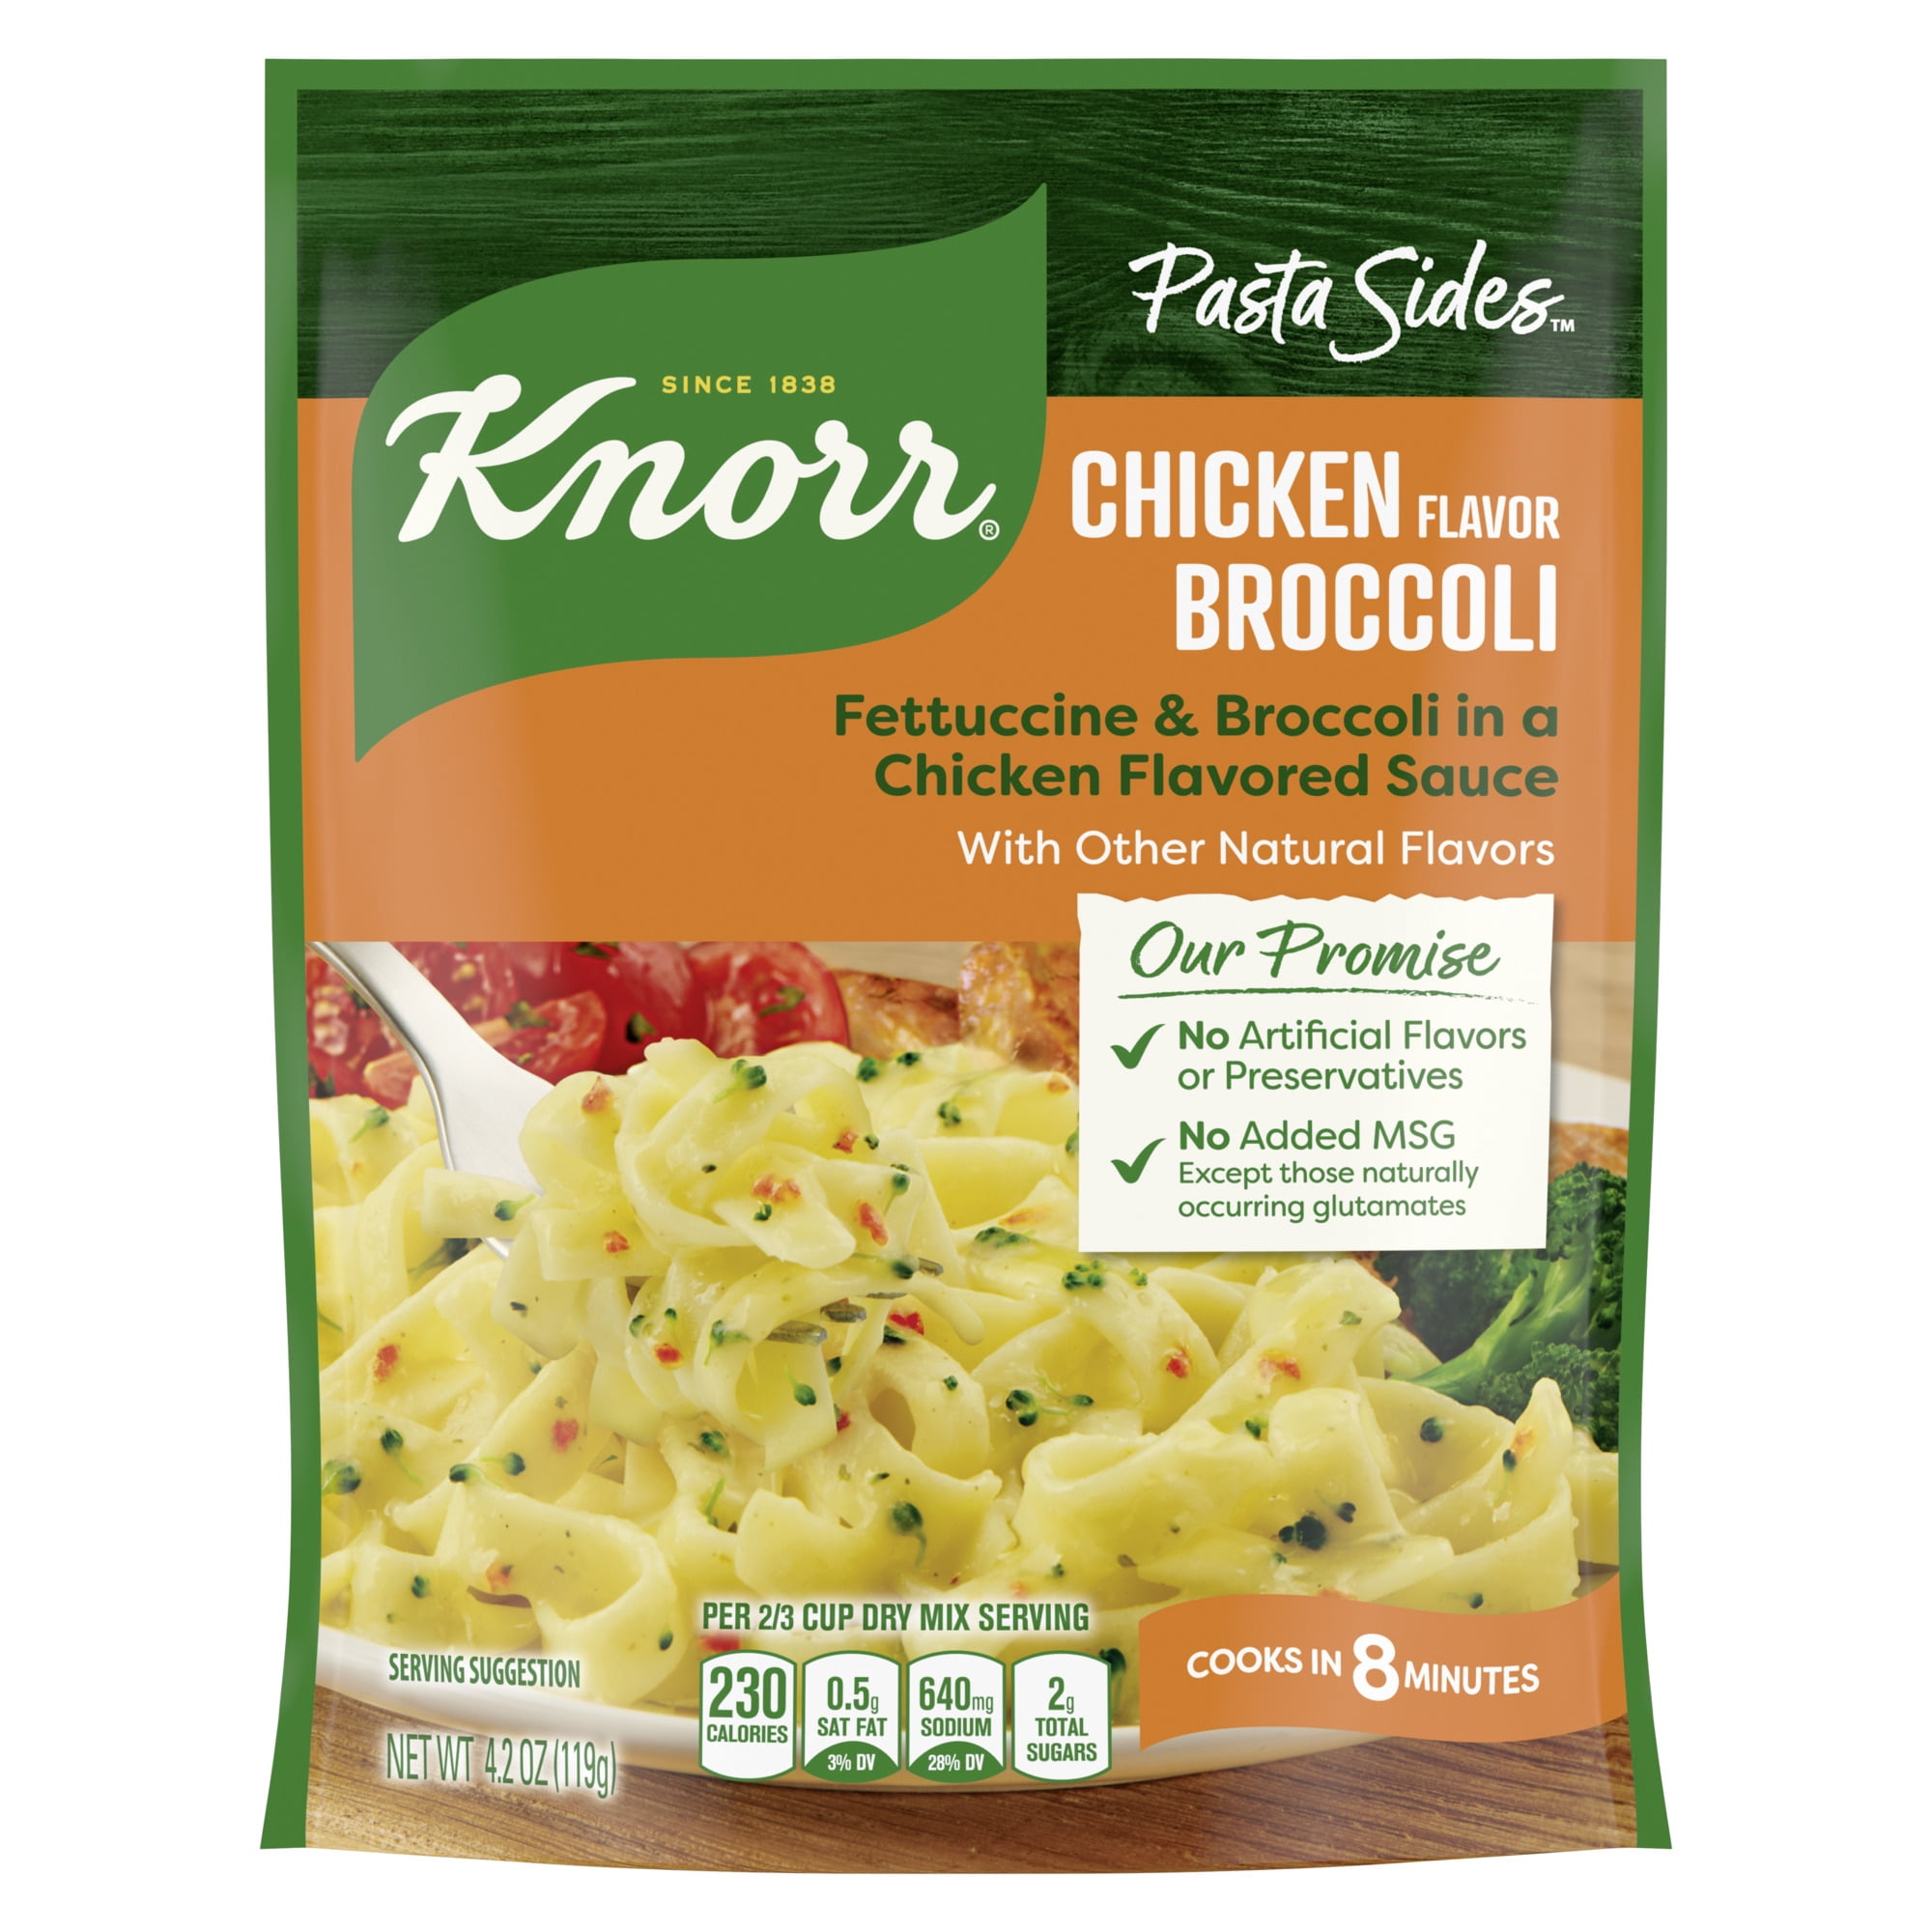 Knorr Pasta Sides Chicken Broccoli, Fettuccine Pasta, Cooks in 8 Minutes, No Artificial Flavors, No Colors from Artificial Sources, No Added MSG, 4.2 Oz